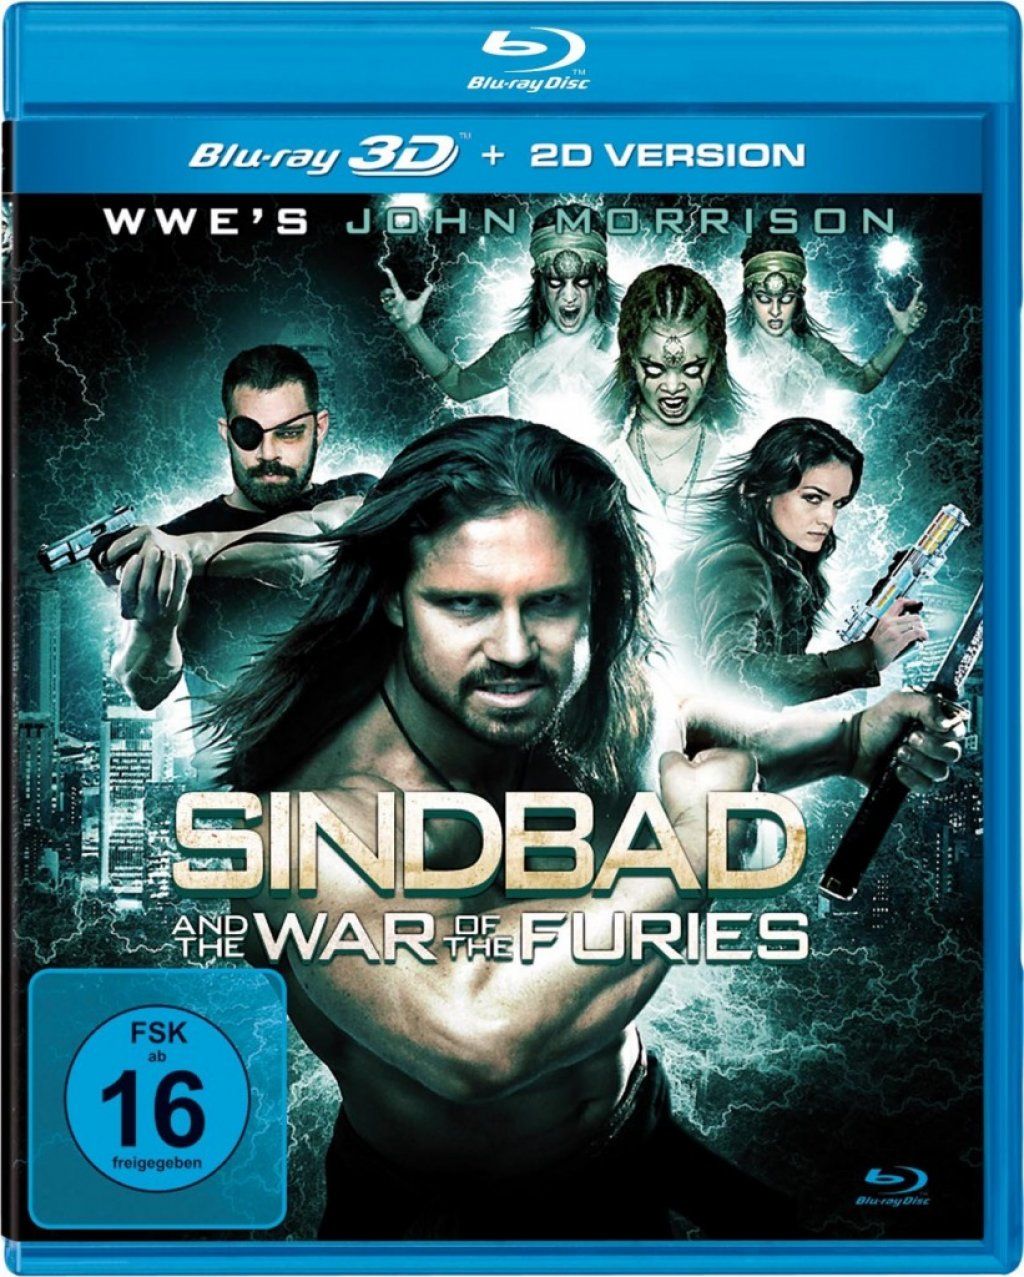 Sindbad and the War of the Furies (BLURAY 3D)